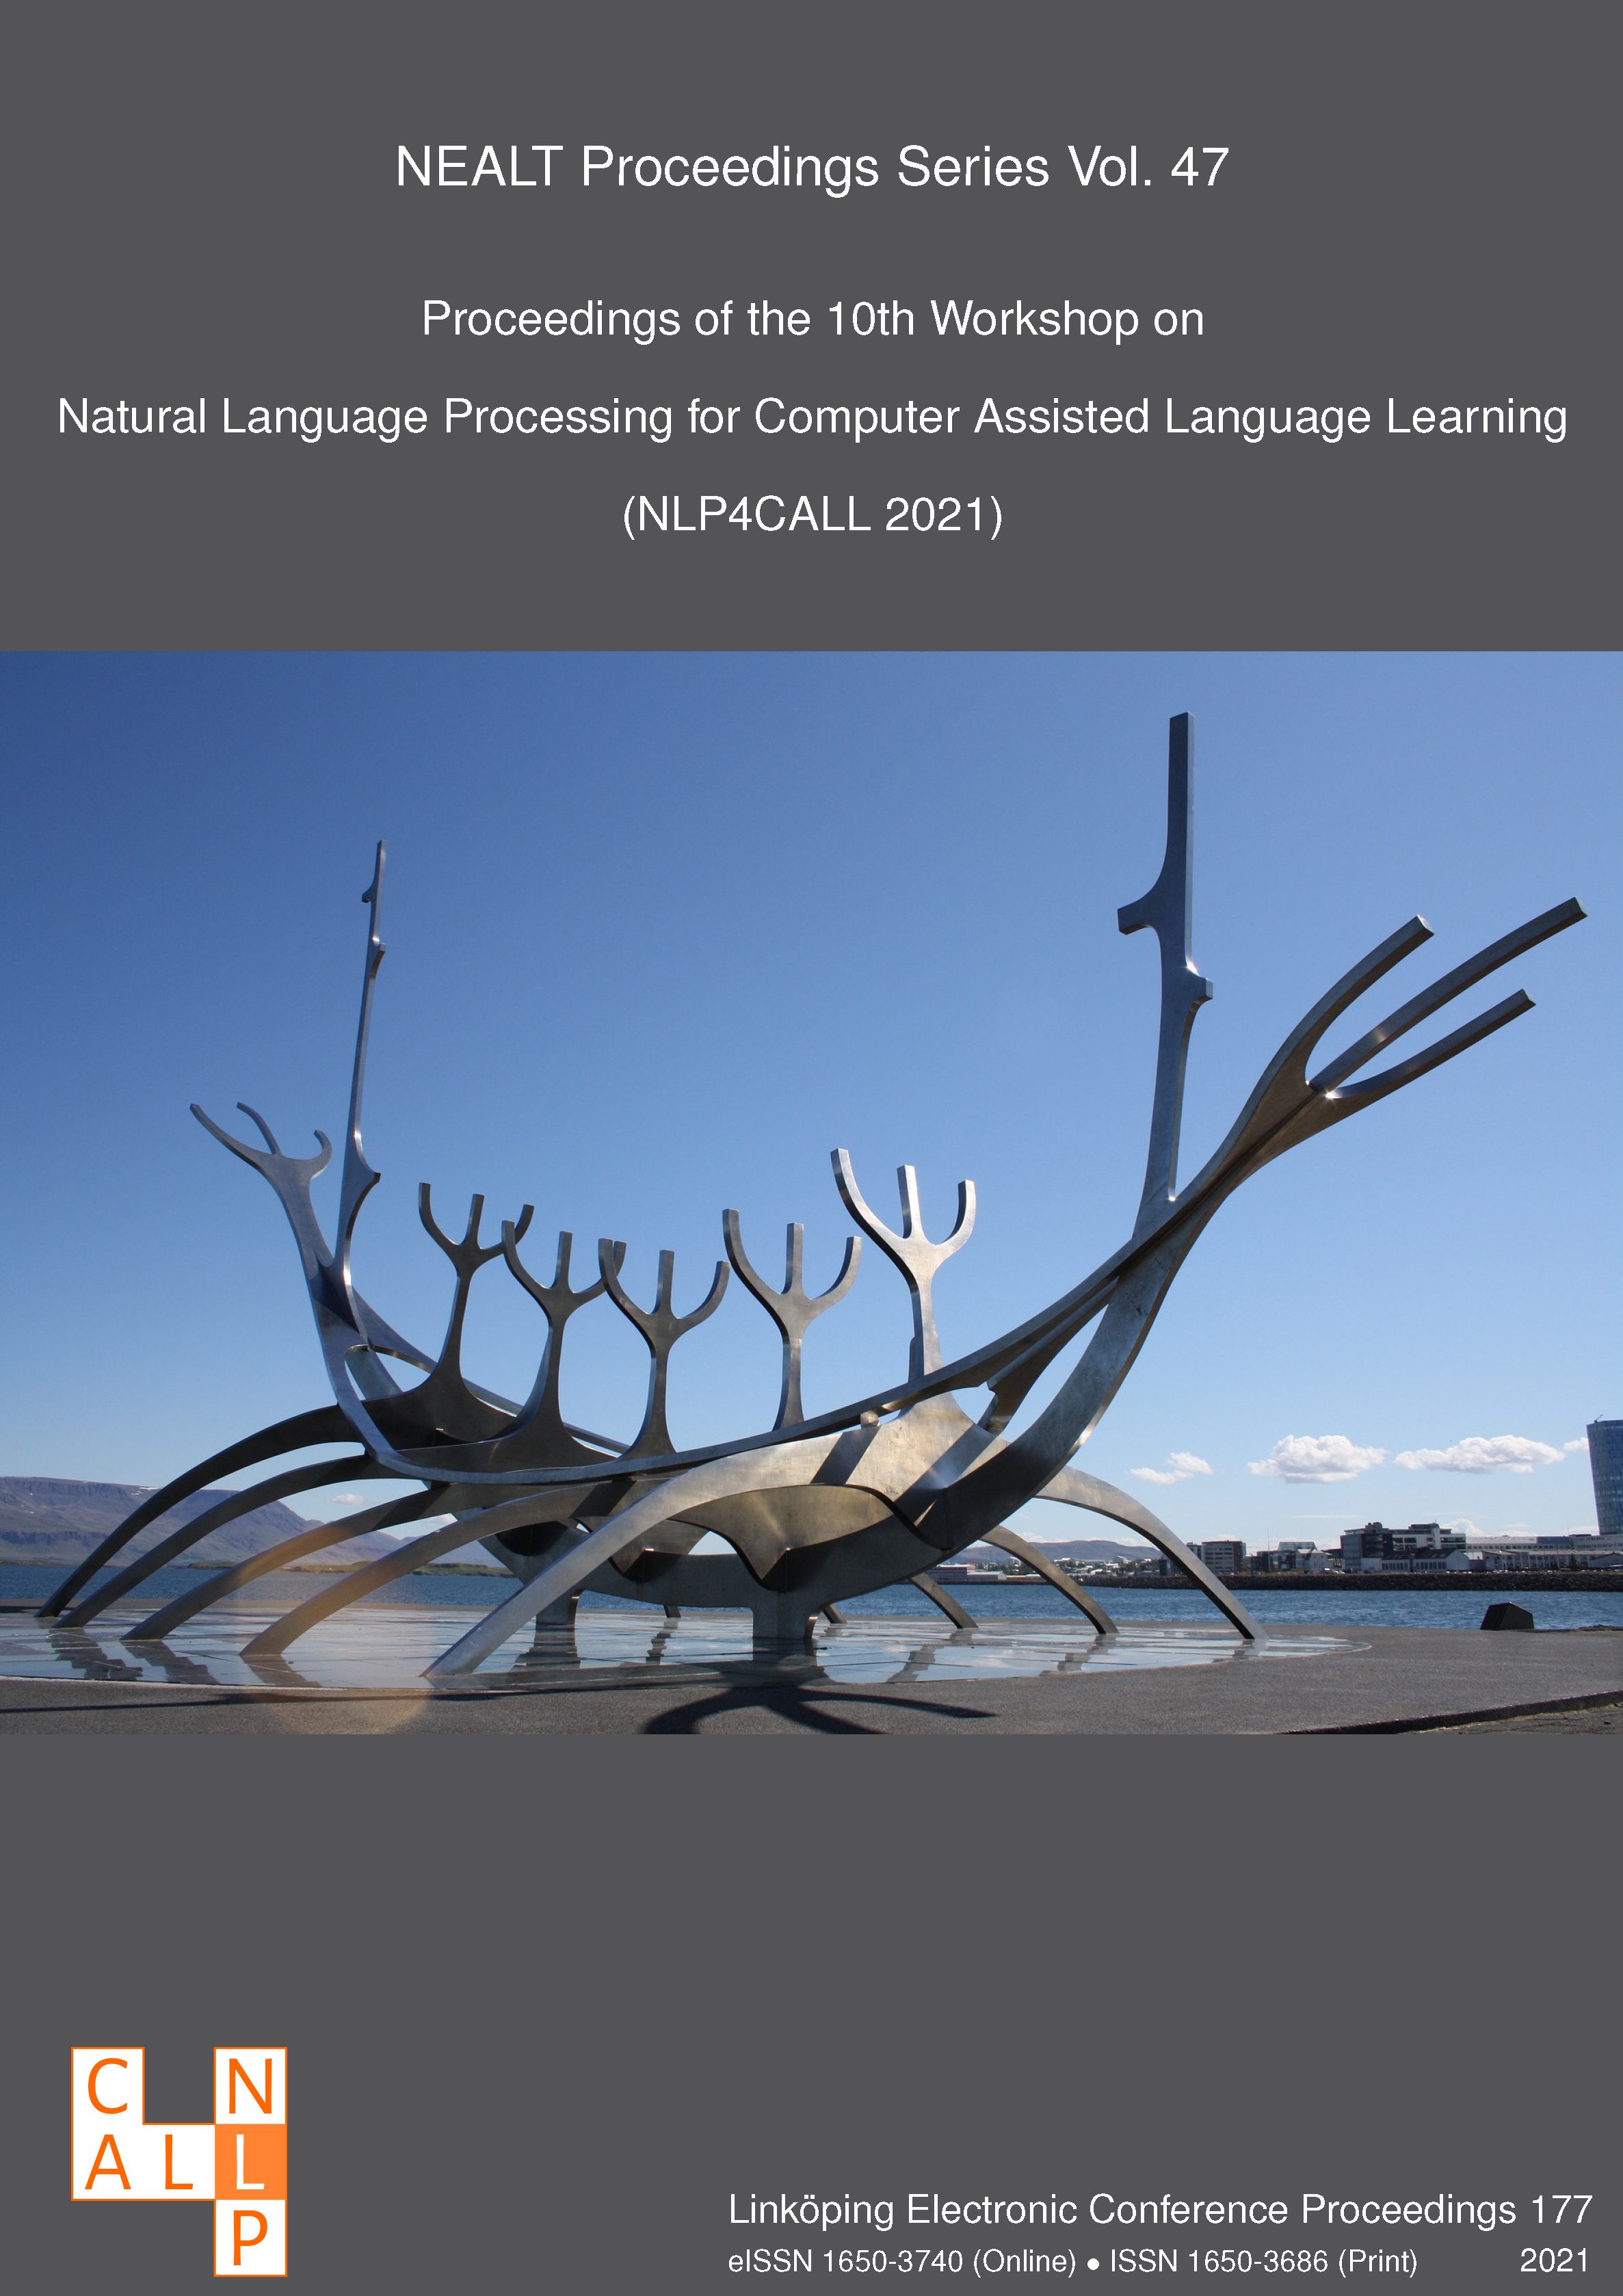 					View Proceedings of the 10th Workshop on Natural Language Processing for Computer Assisted Language Learning (NLP4CALL 2021)
				